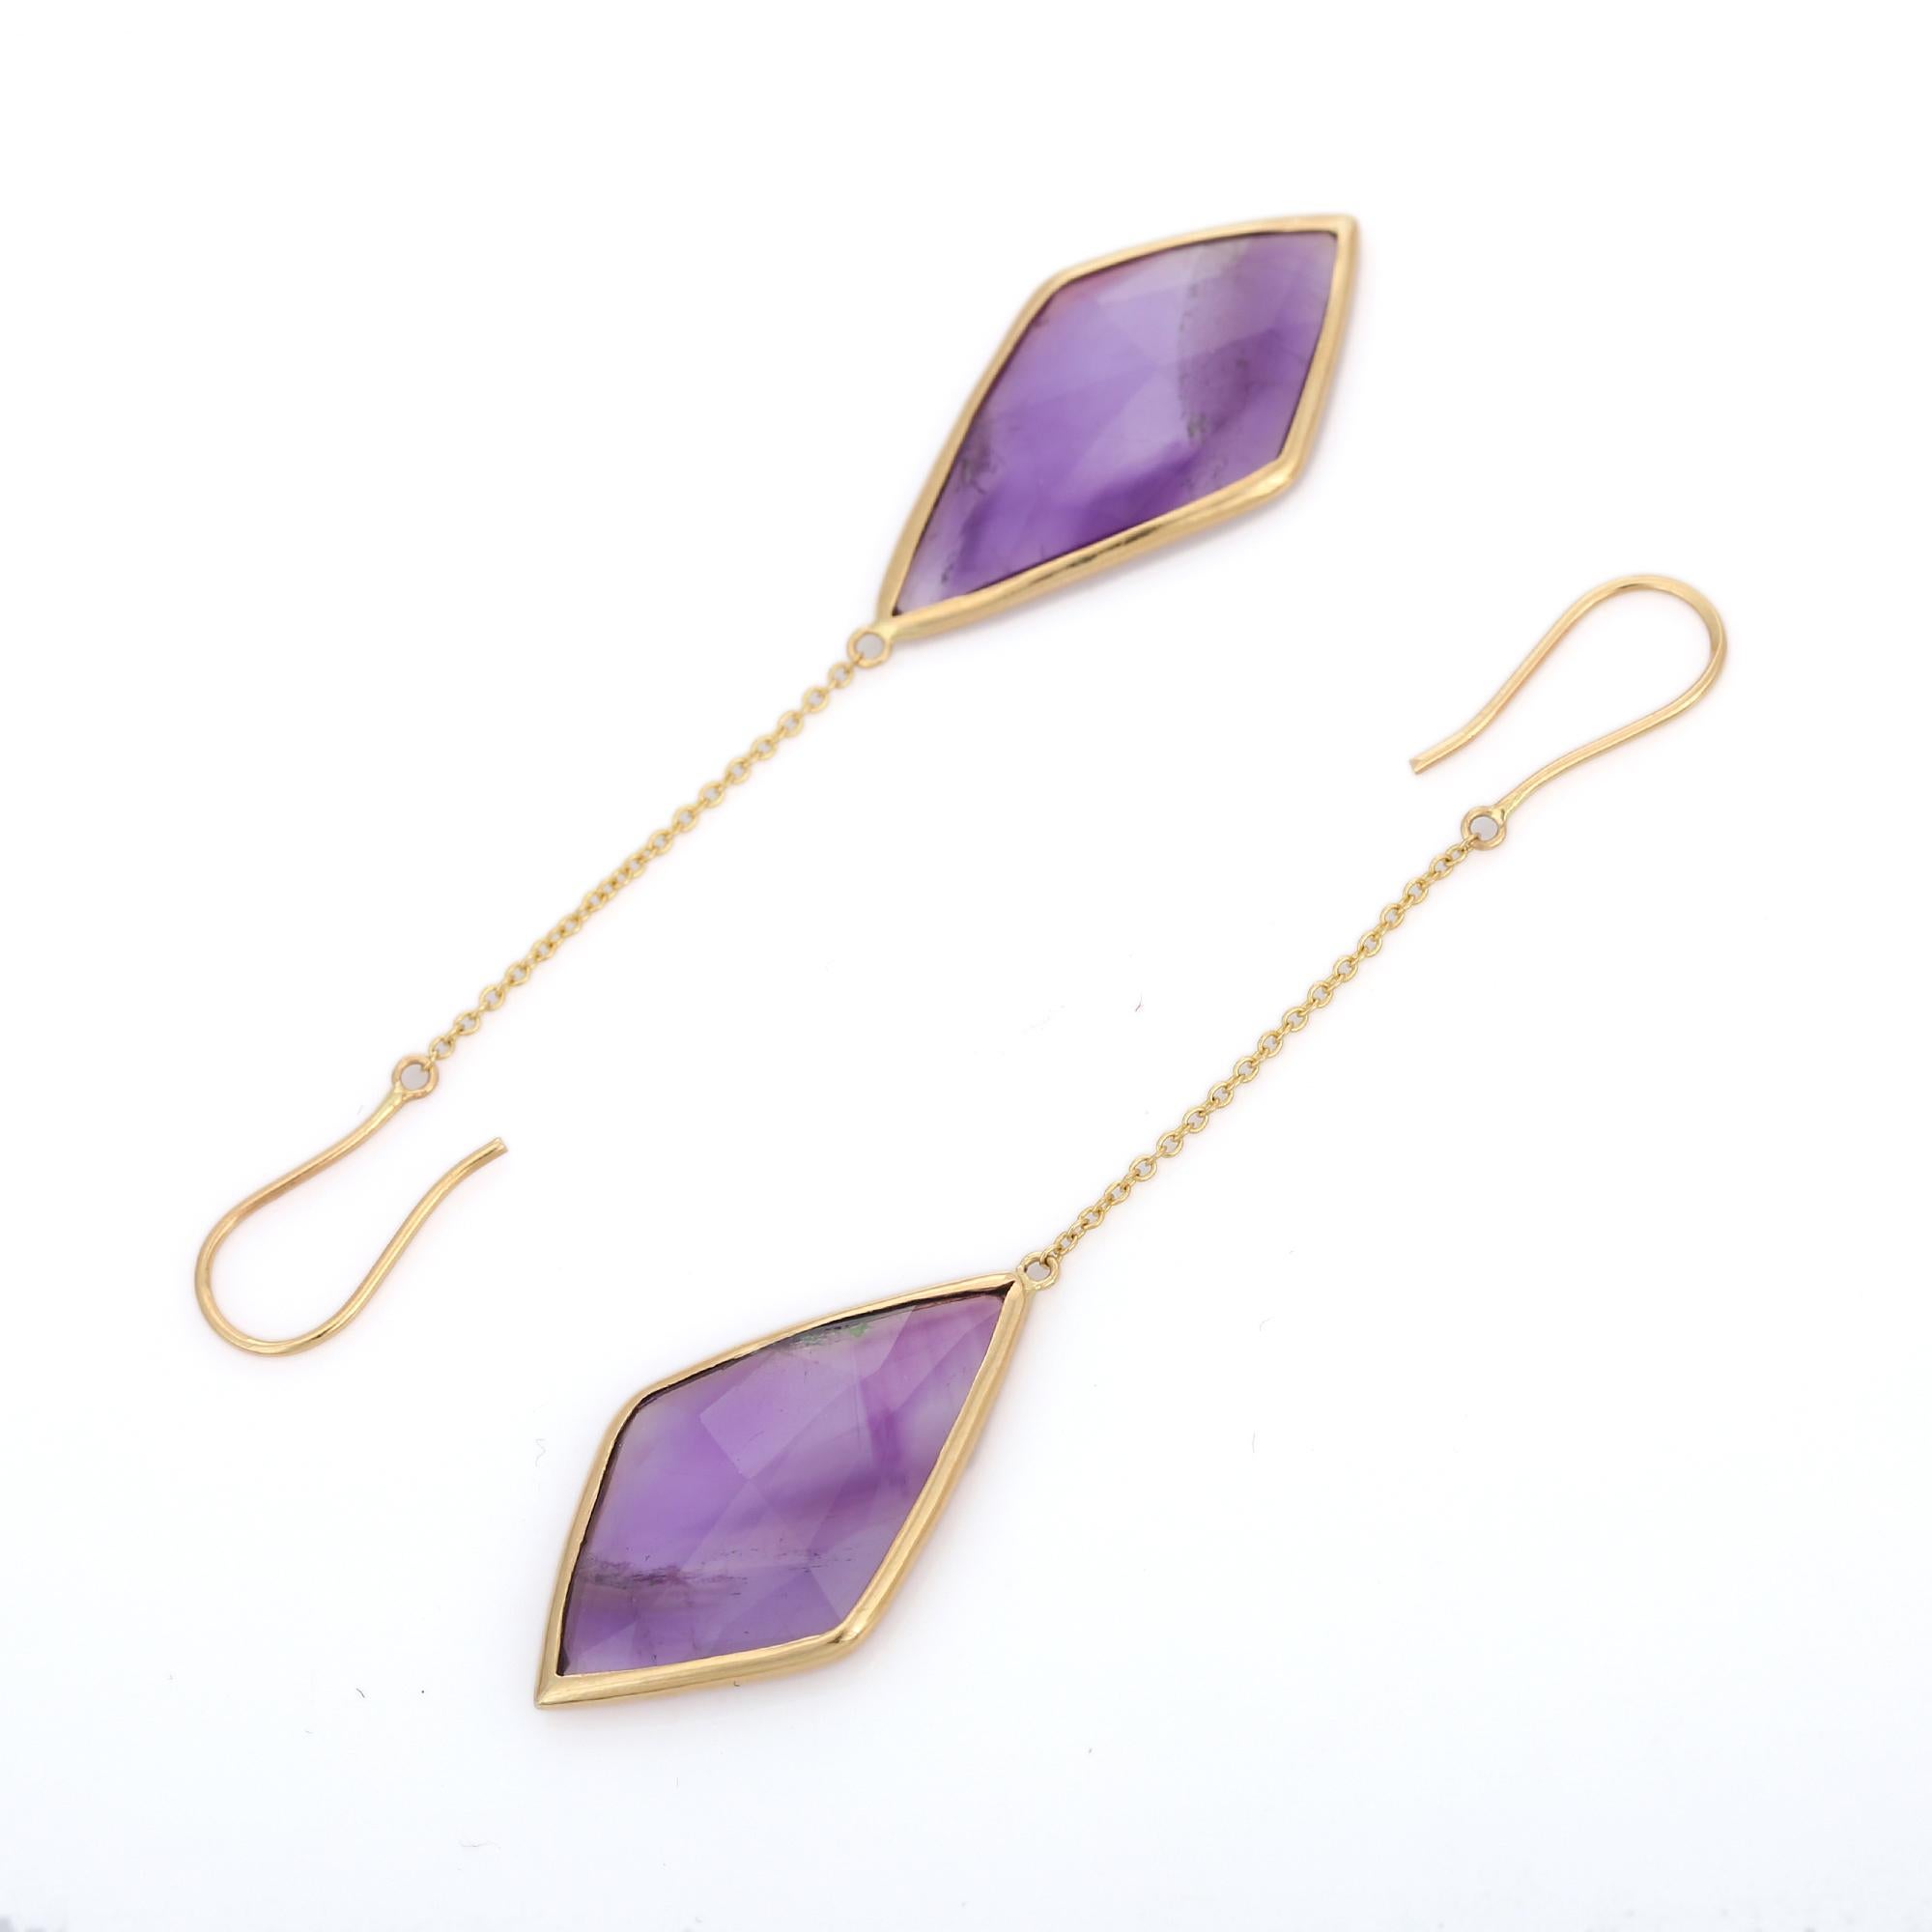 Amethyst Dangle earrings to make a statement with your look. These earrings create a sparkling, luxurious look featuring kite cut gemstone.
If you love to gravitate towards unique styles, this piece of jewelry is perfect for you.

PRODUCT DETAILS